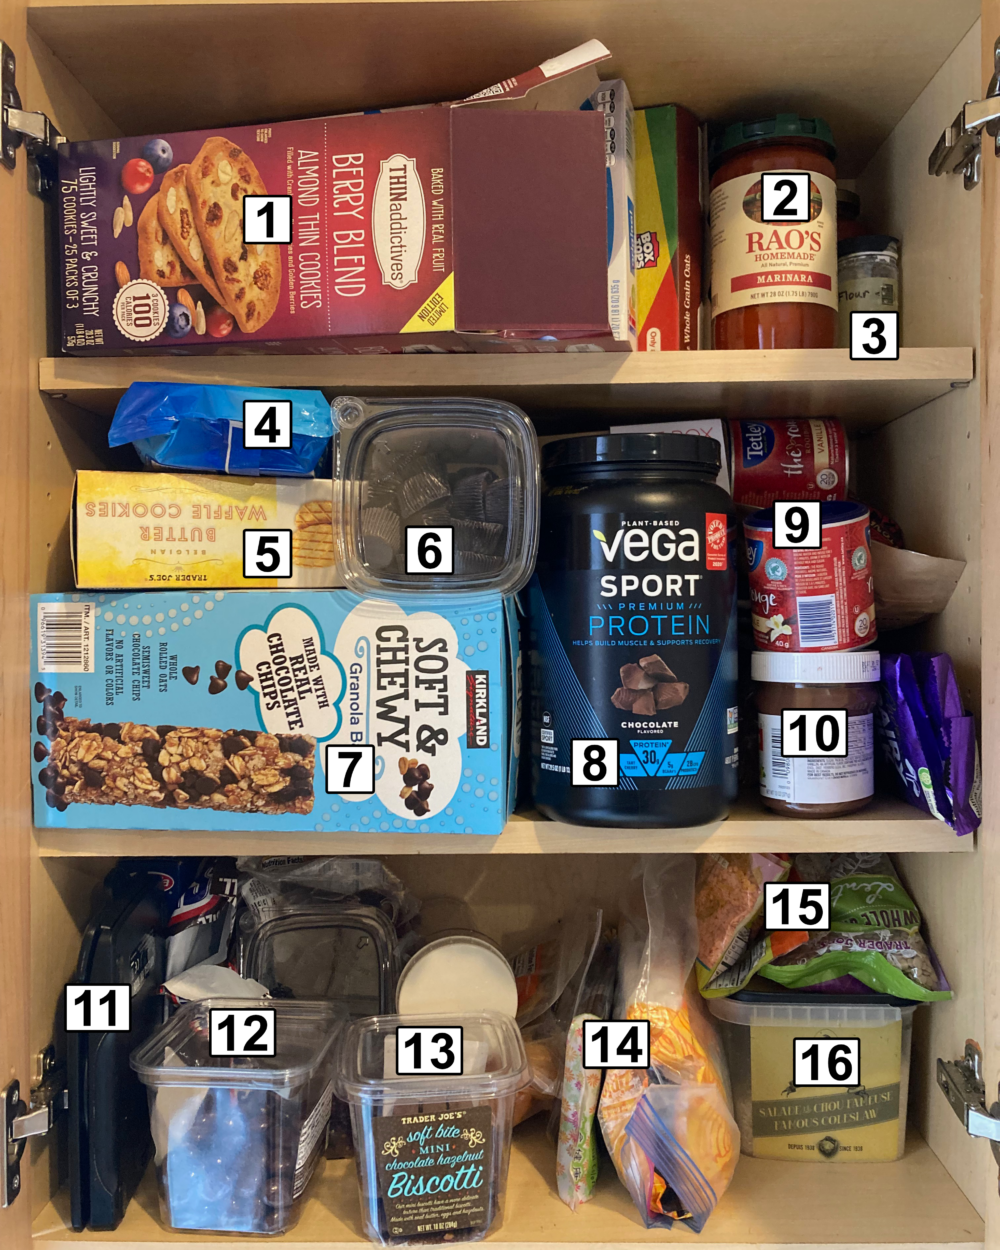 The cabinet with individual items labelled with numbers.